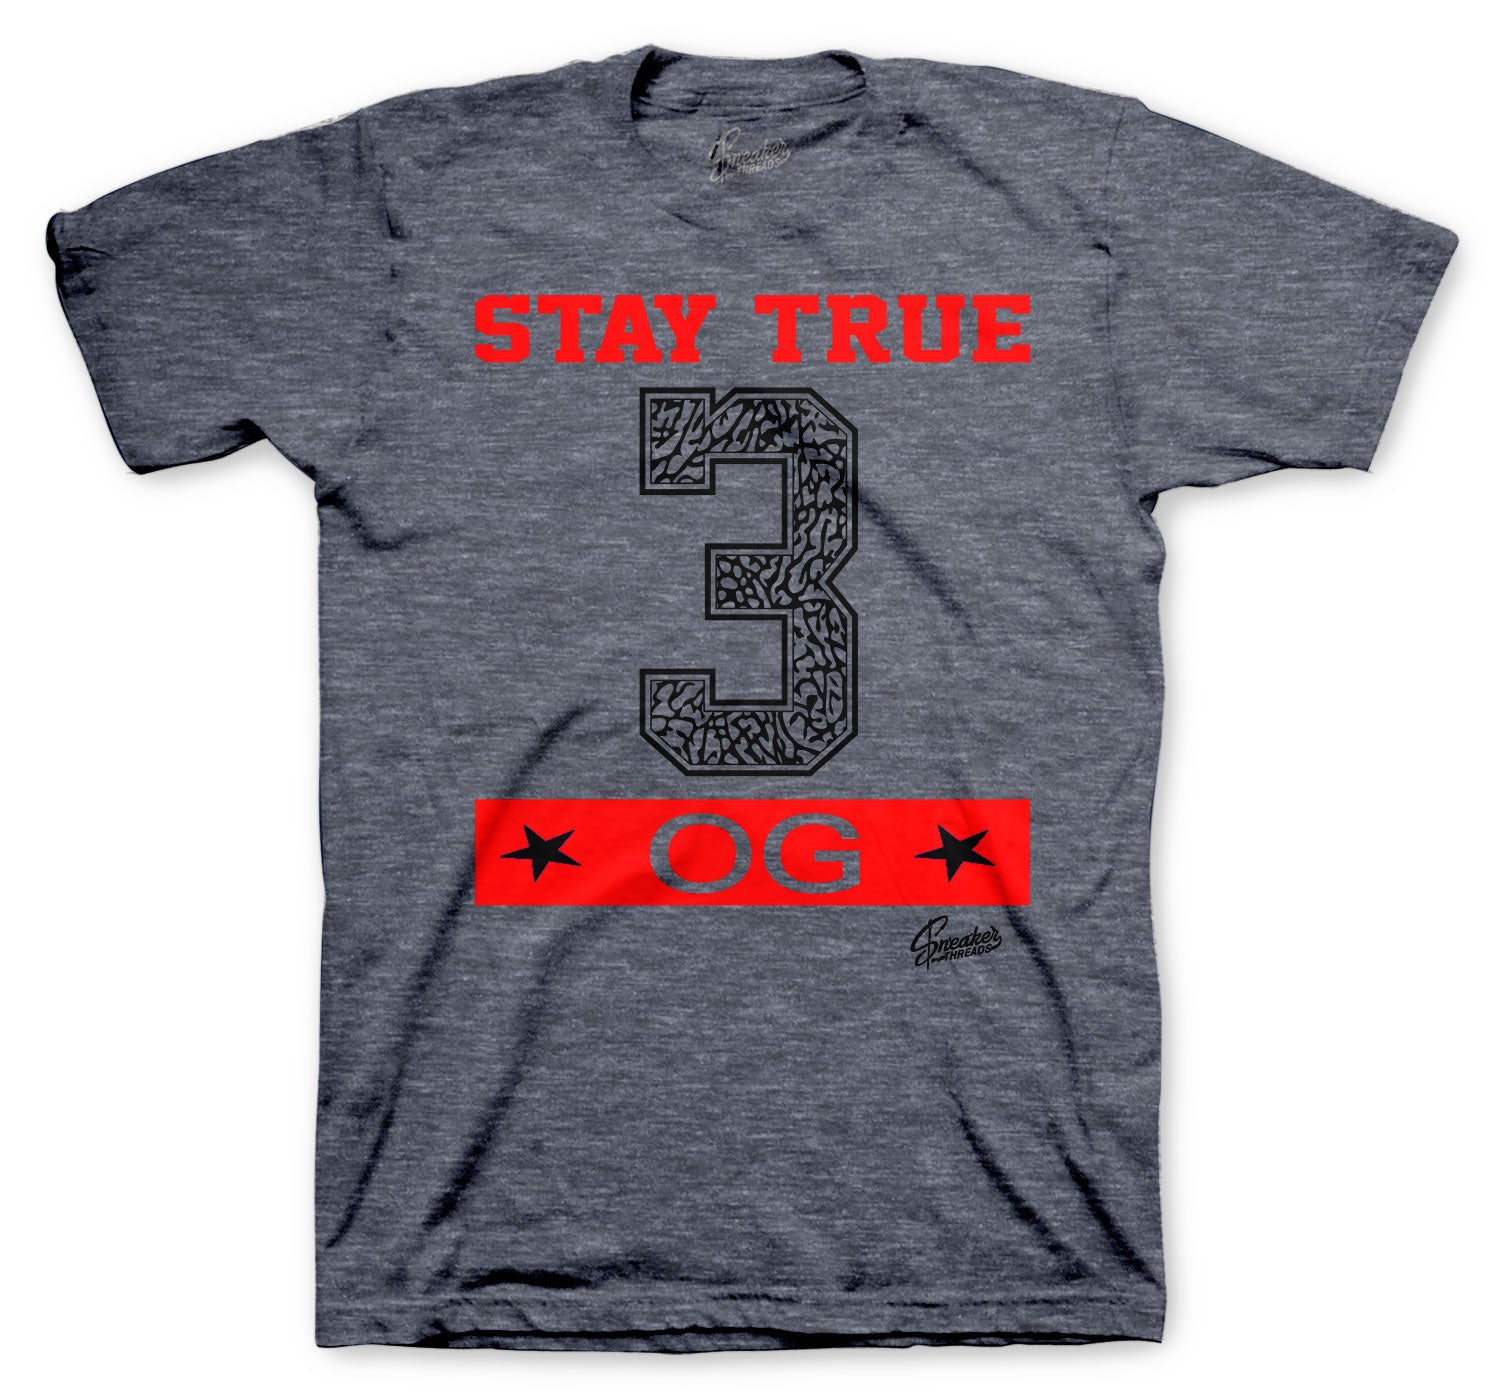 Fire Denim Jordan 3 sneaker matching perfectly with tees